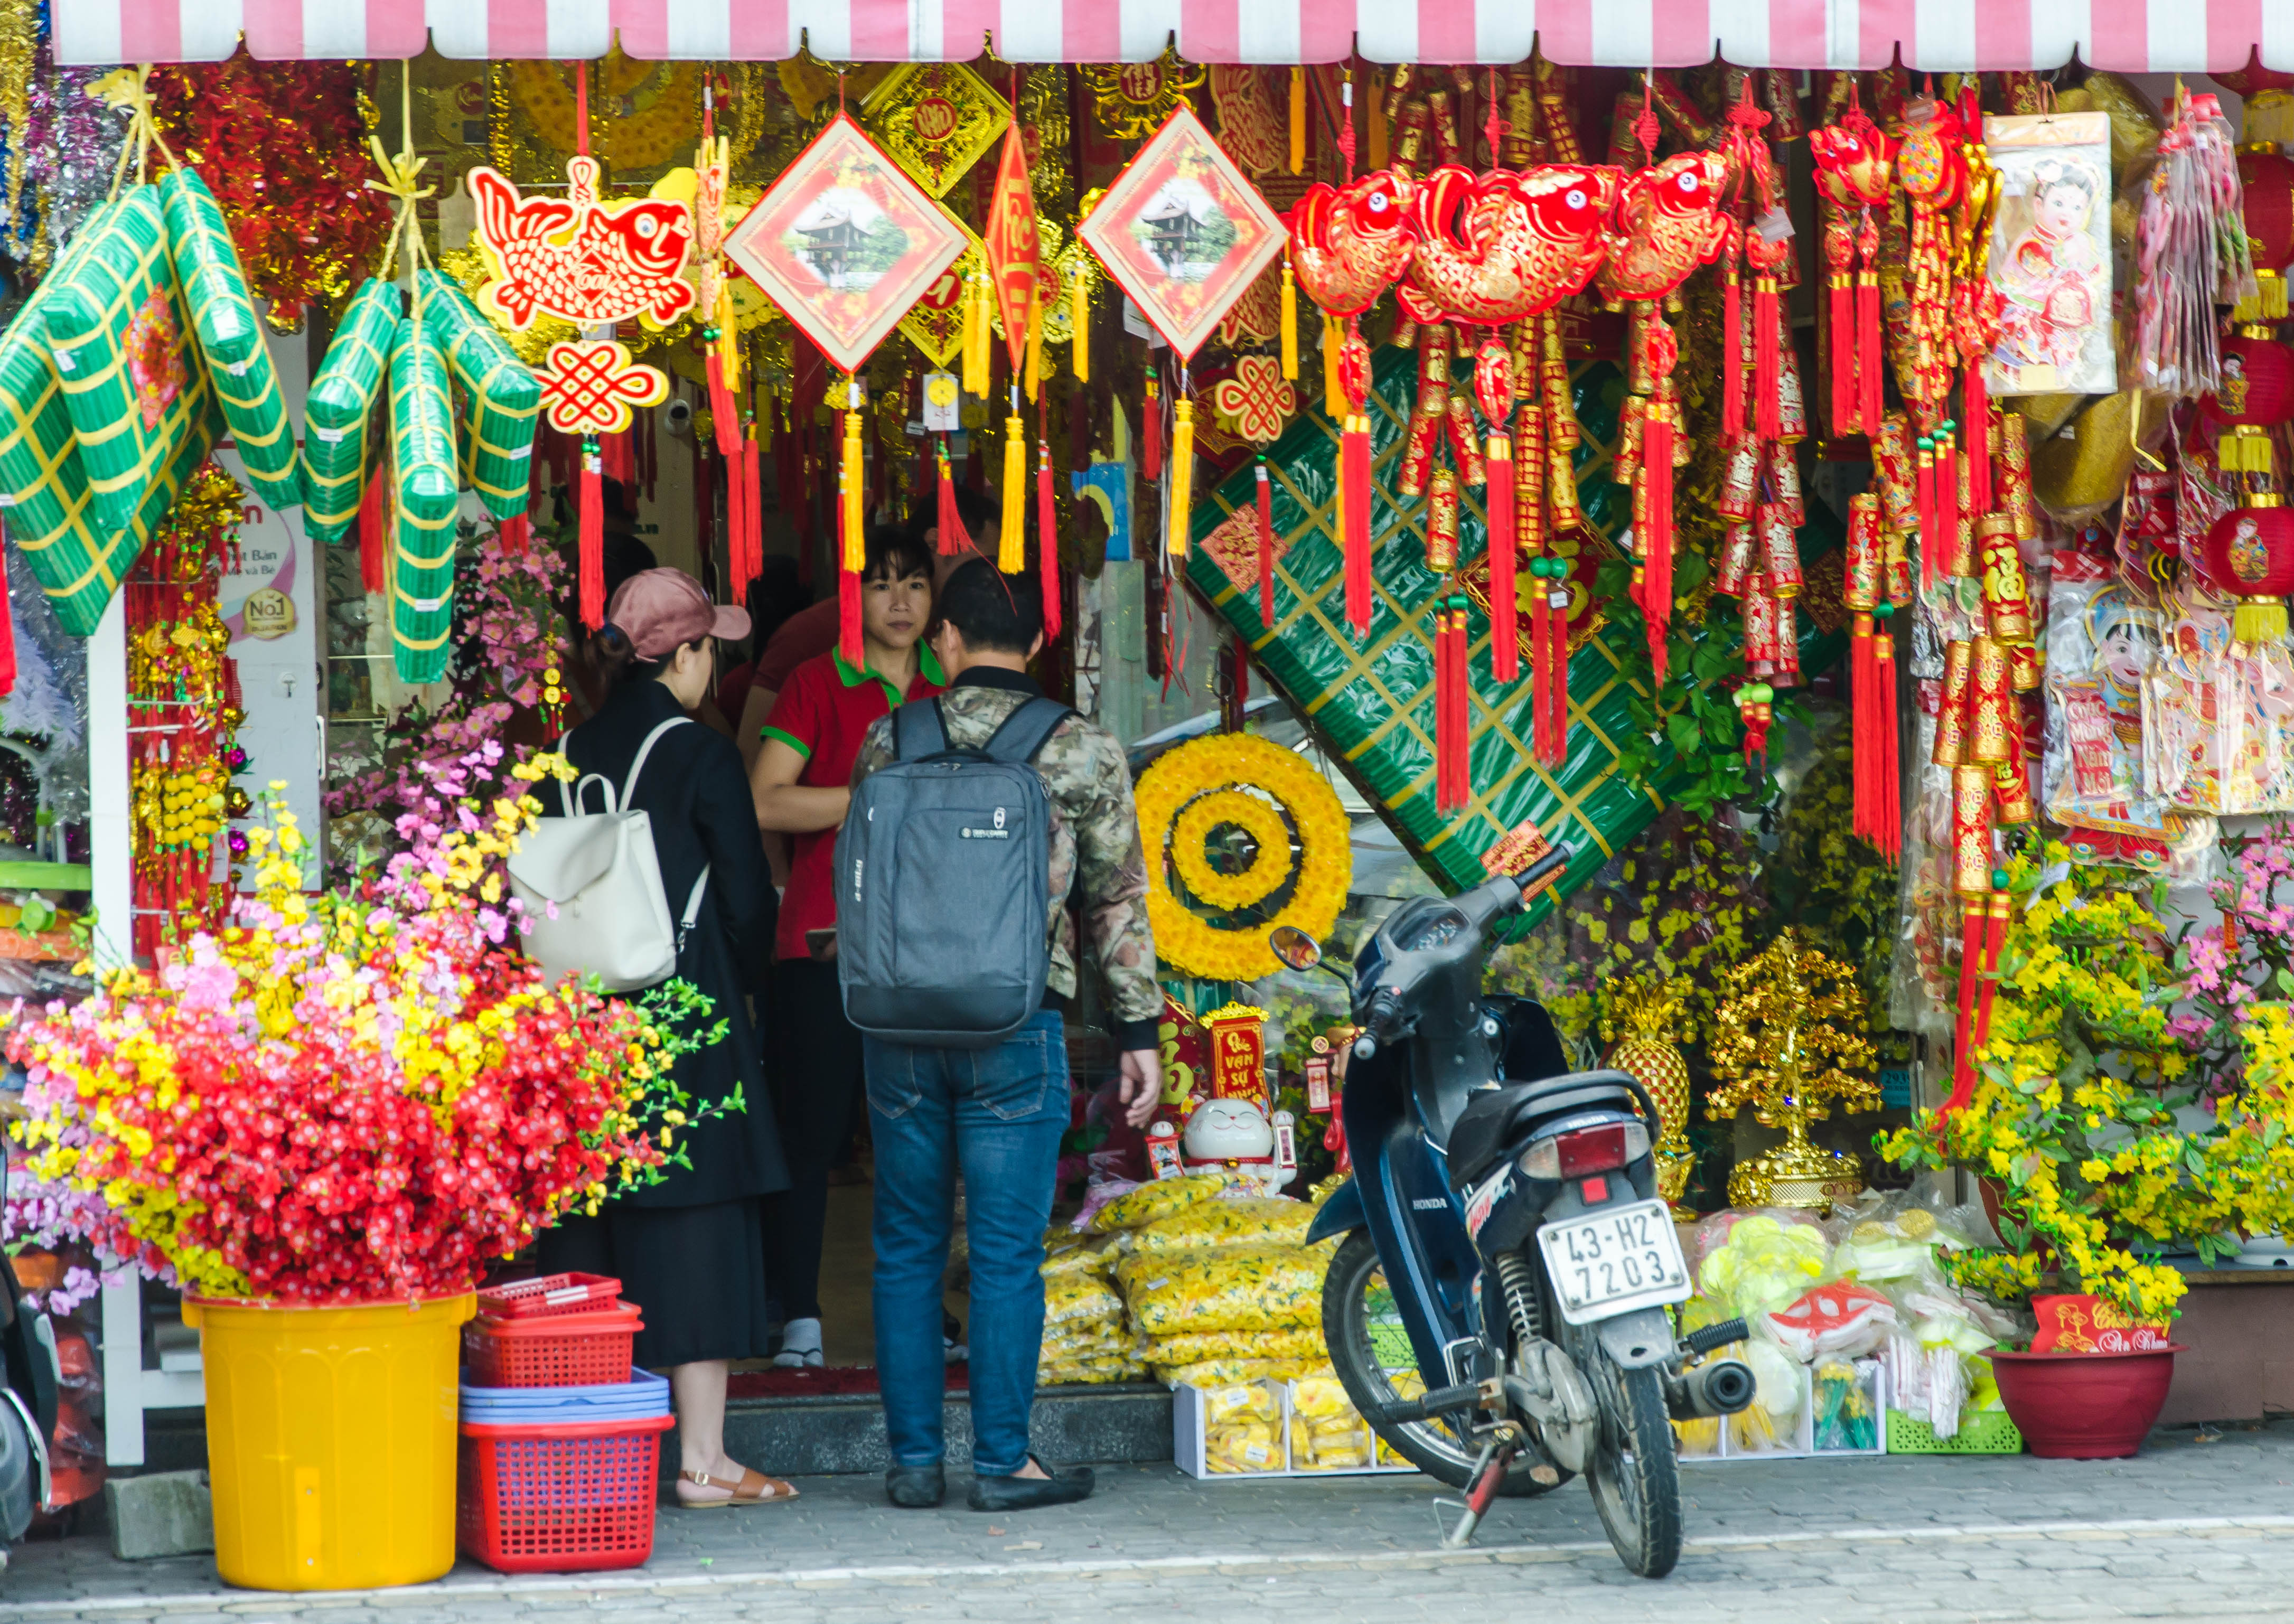 A shop selling home decorative items in Tet.